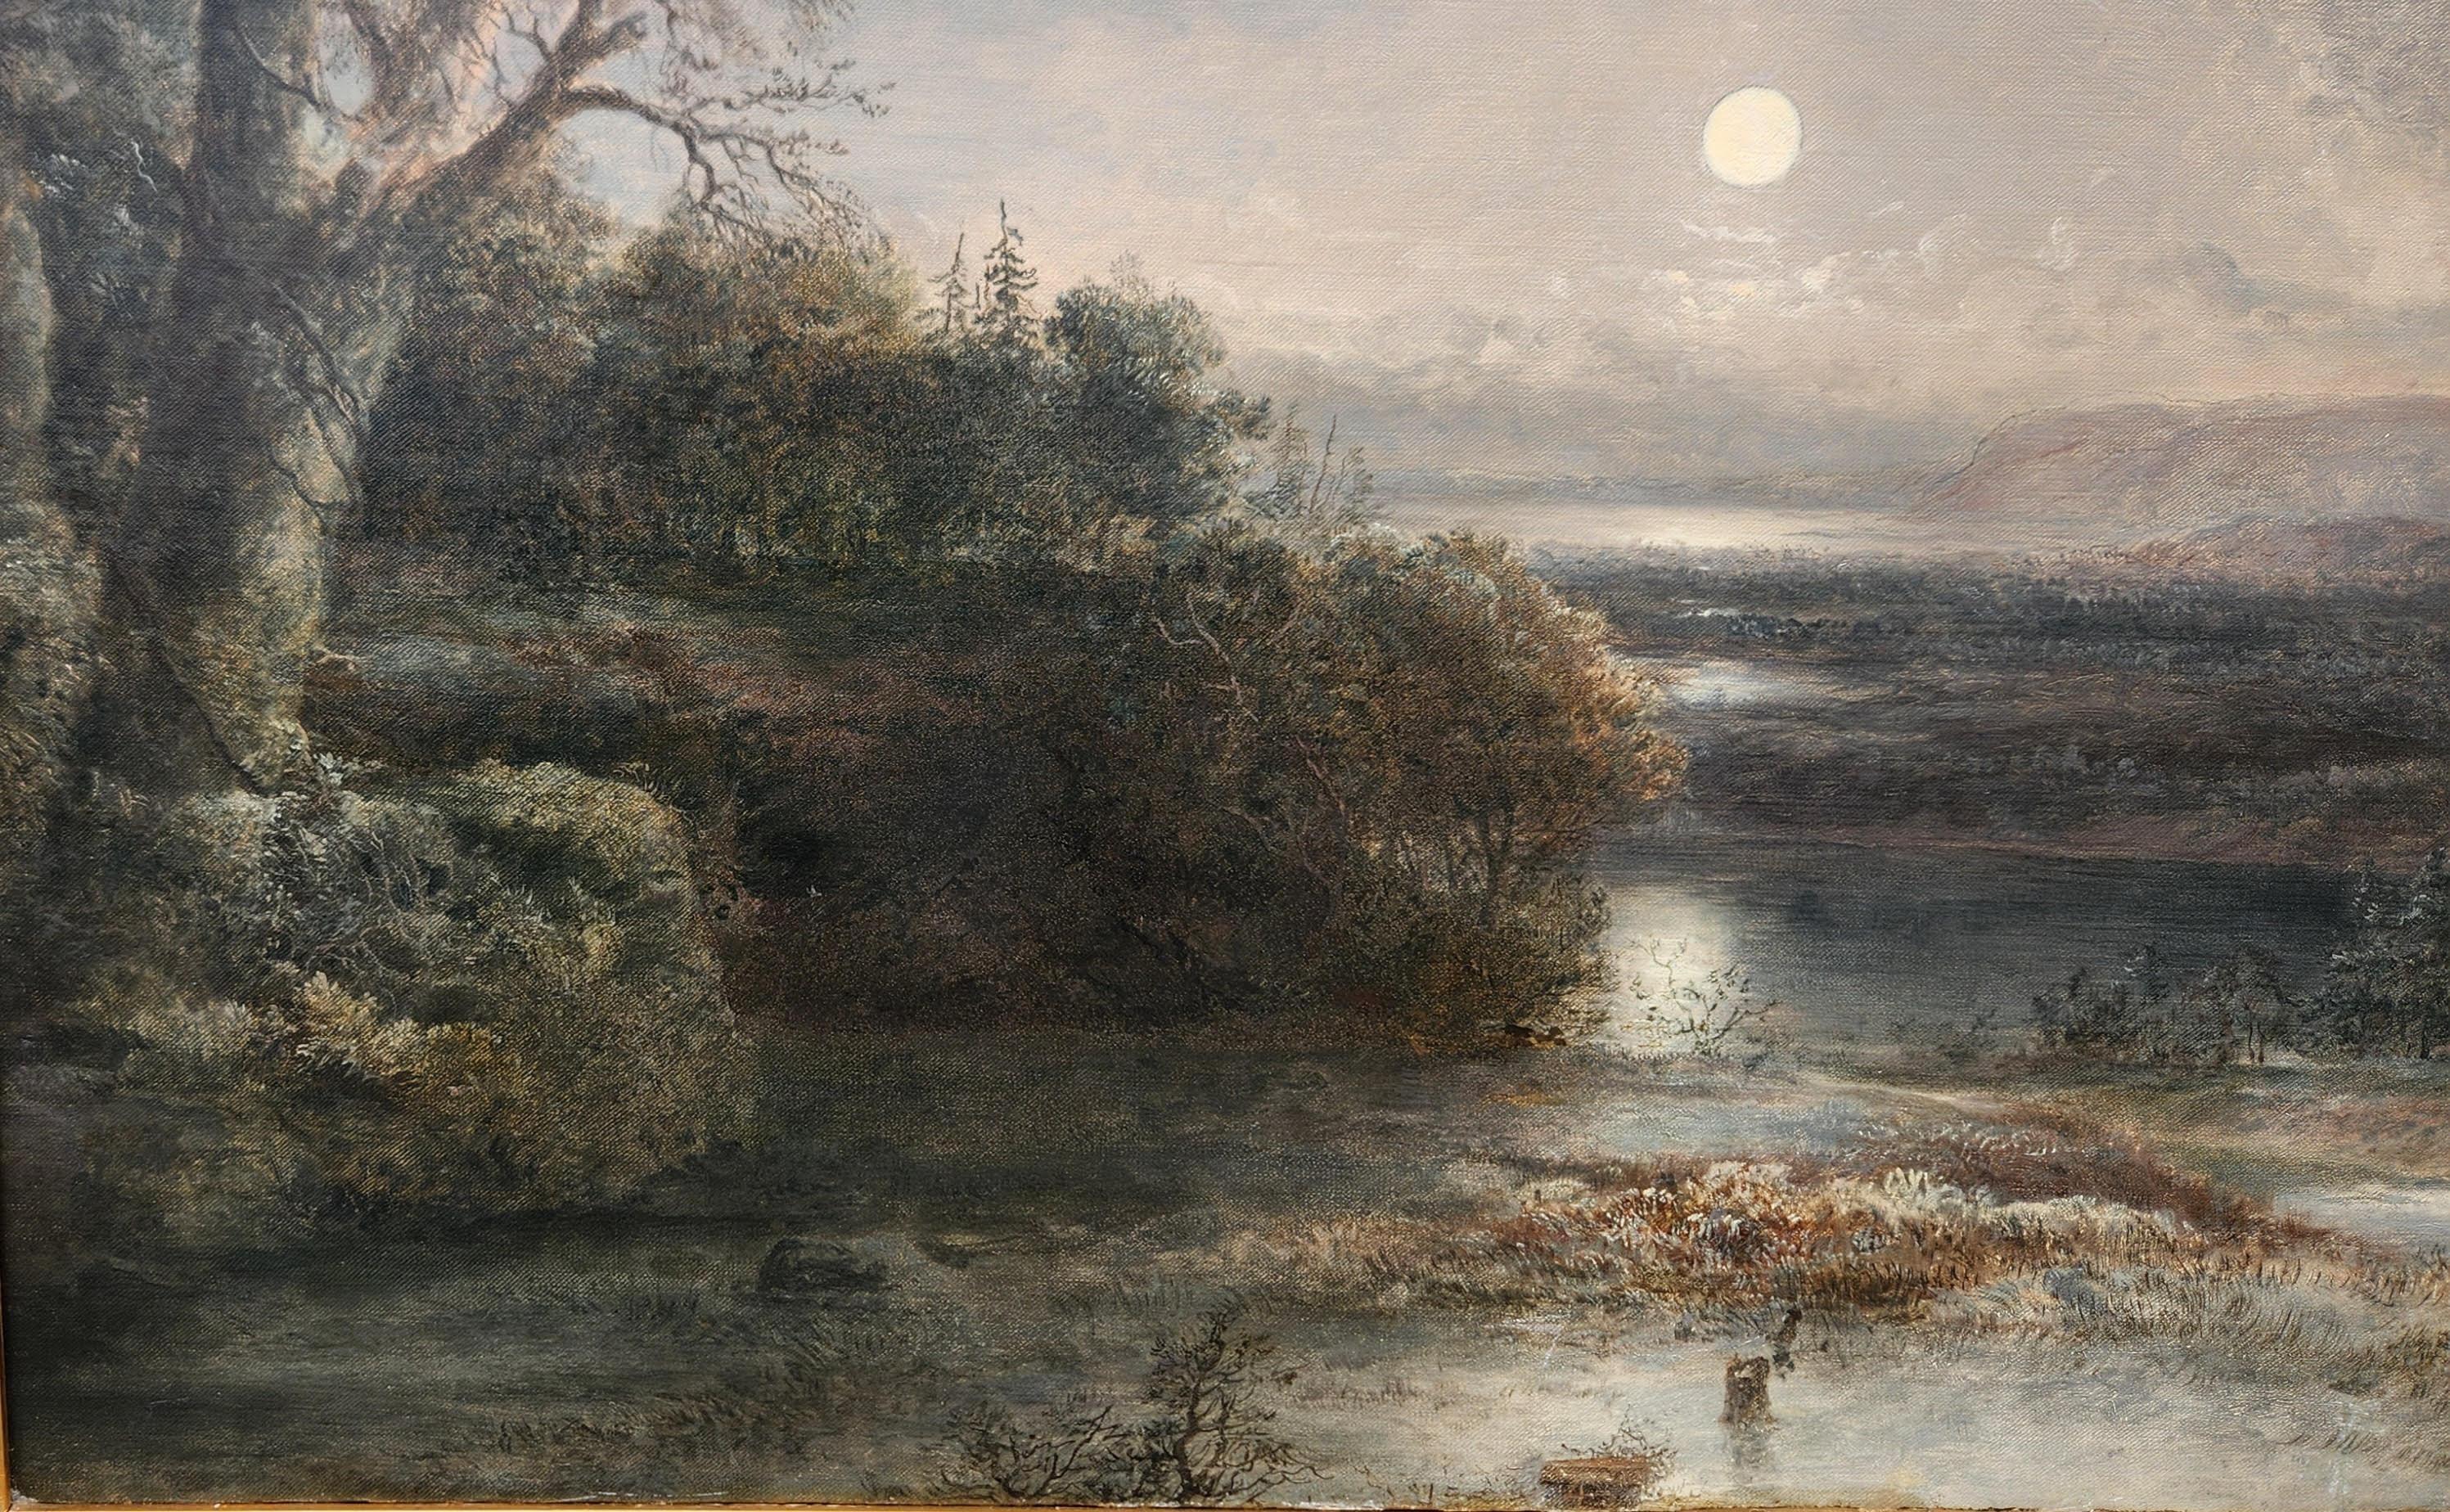 Evening on the Schuylkill River, near Philadelphia - Brown Landscape Painting by Thomas Doughty